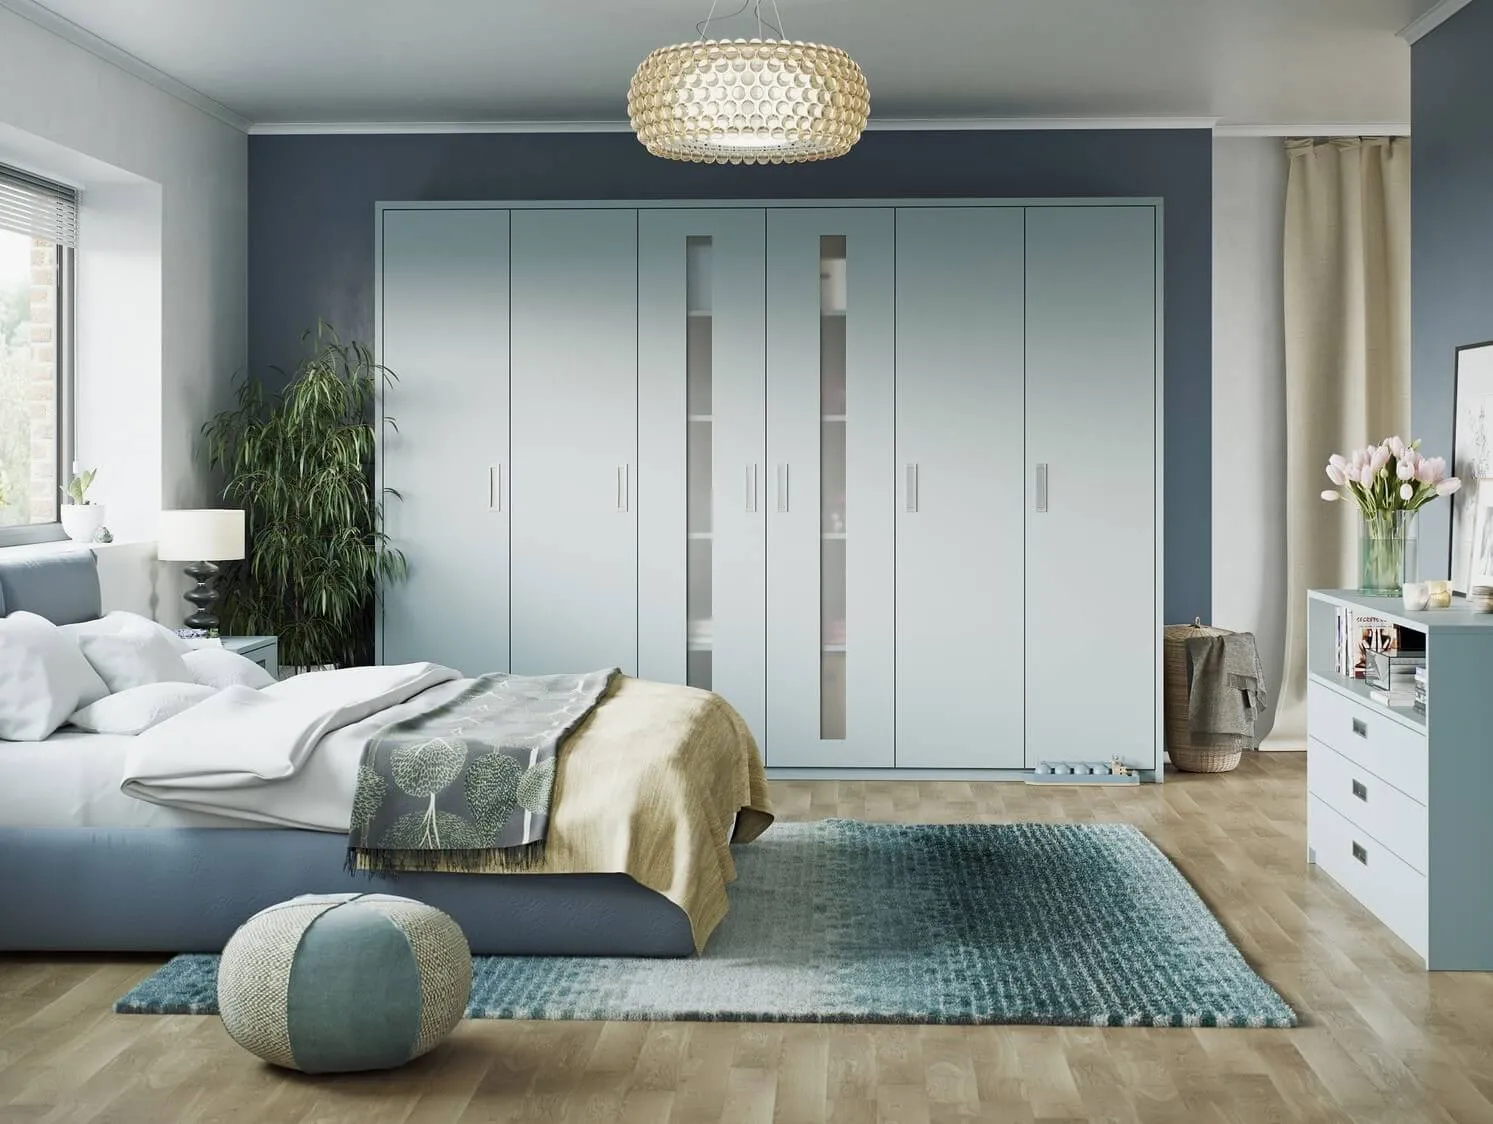 minimalist powder blue bed room with sleek platform bed, pouffe, rug, wardrobe, indoor plant, and a round ceiling light